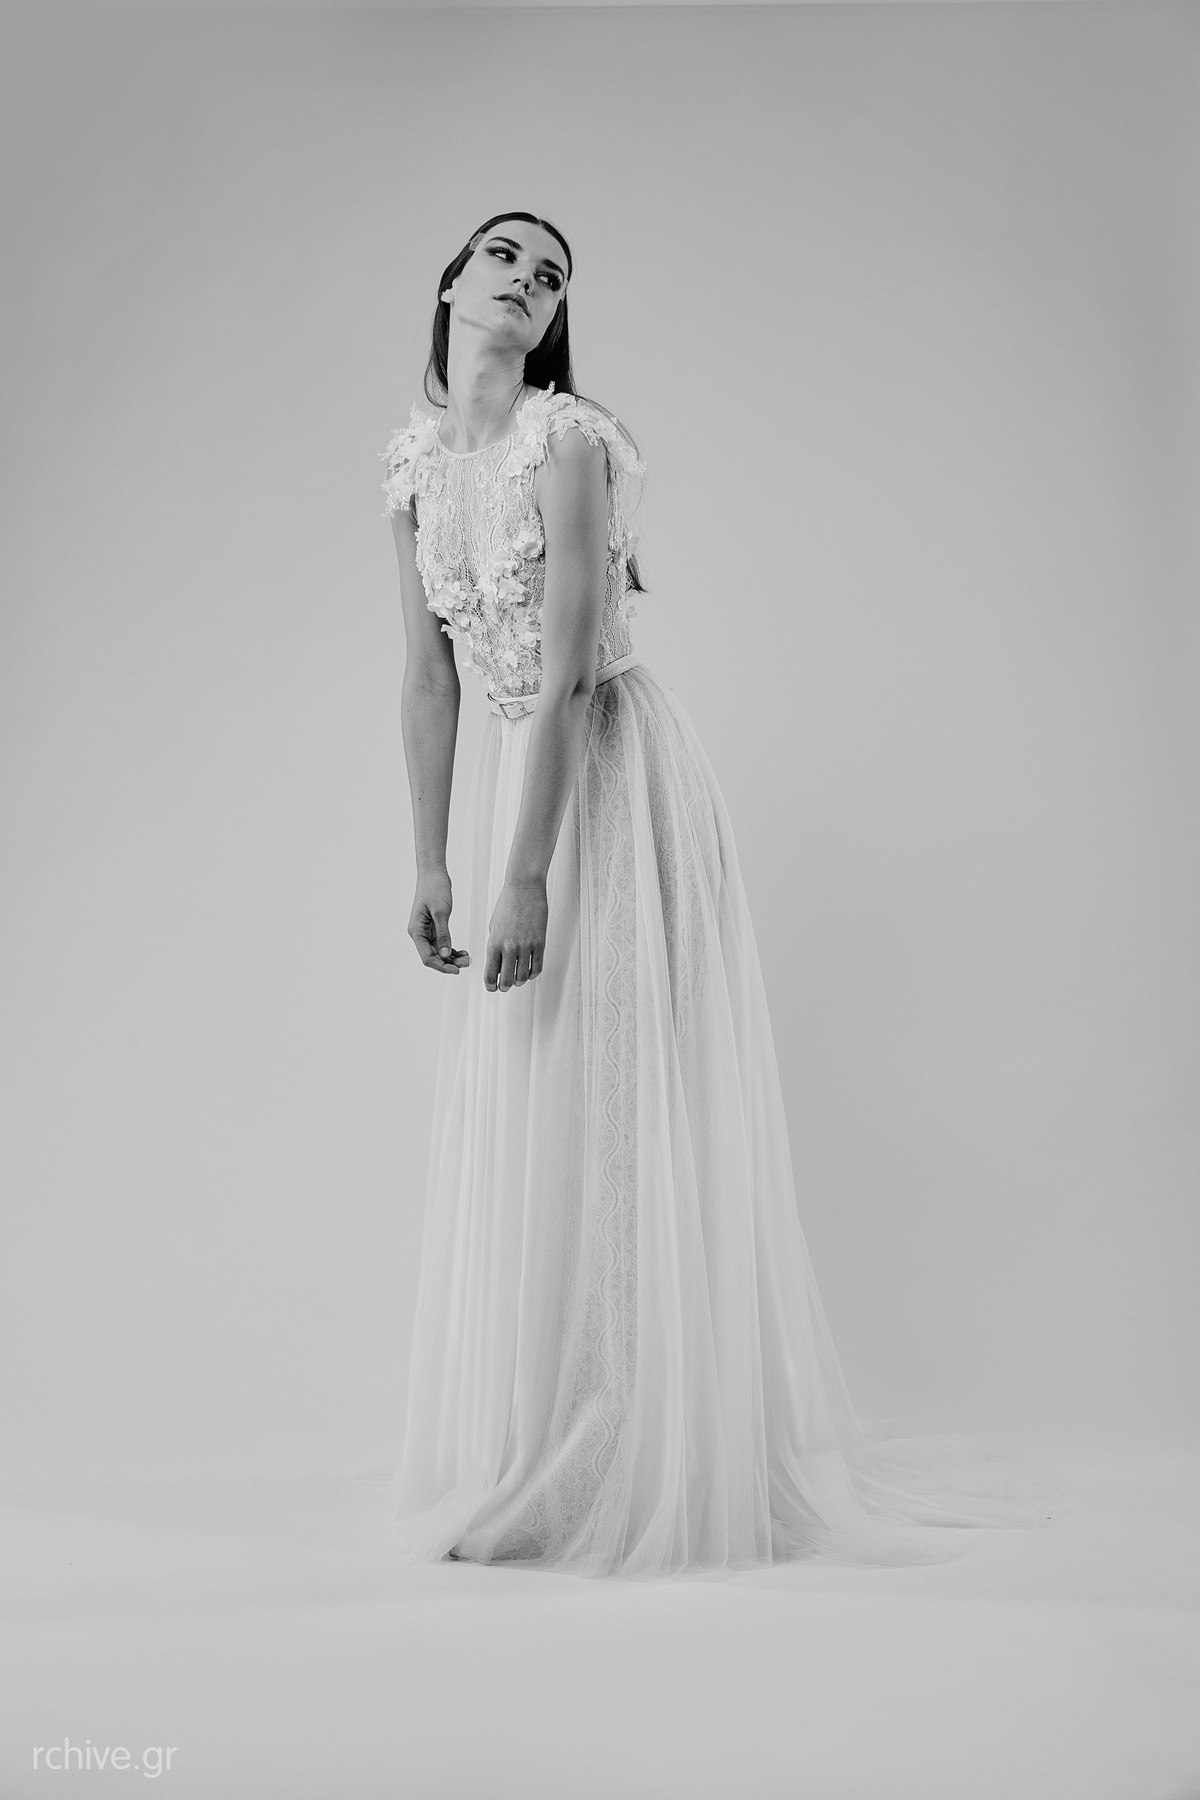 Ethereal wedding dress with closed neckline